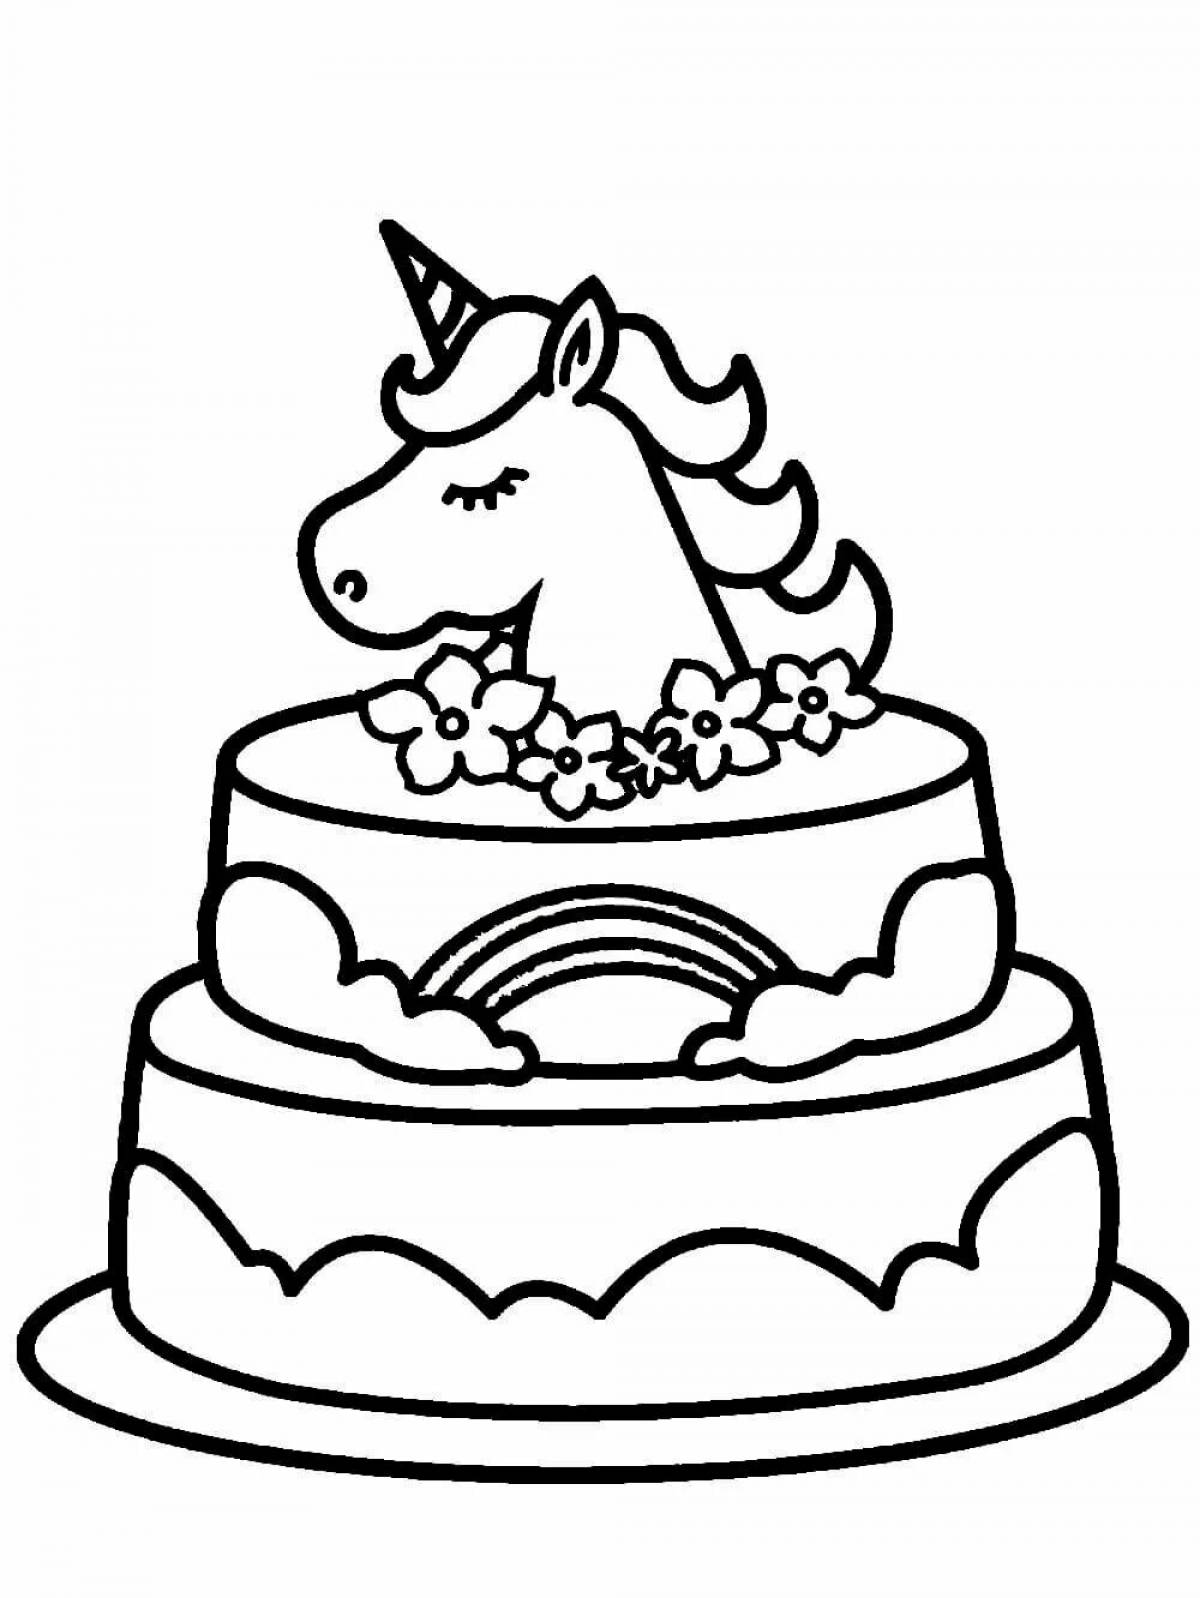 Spectacular beautiful cake coloring page